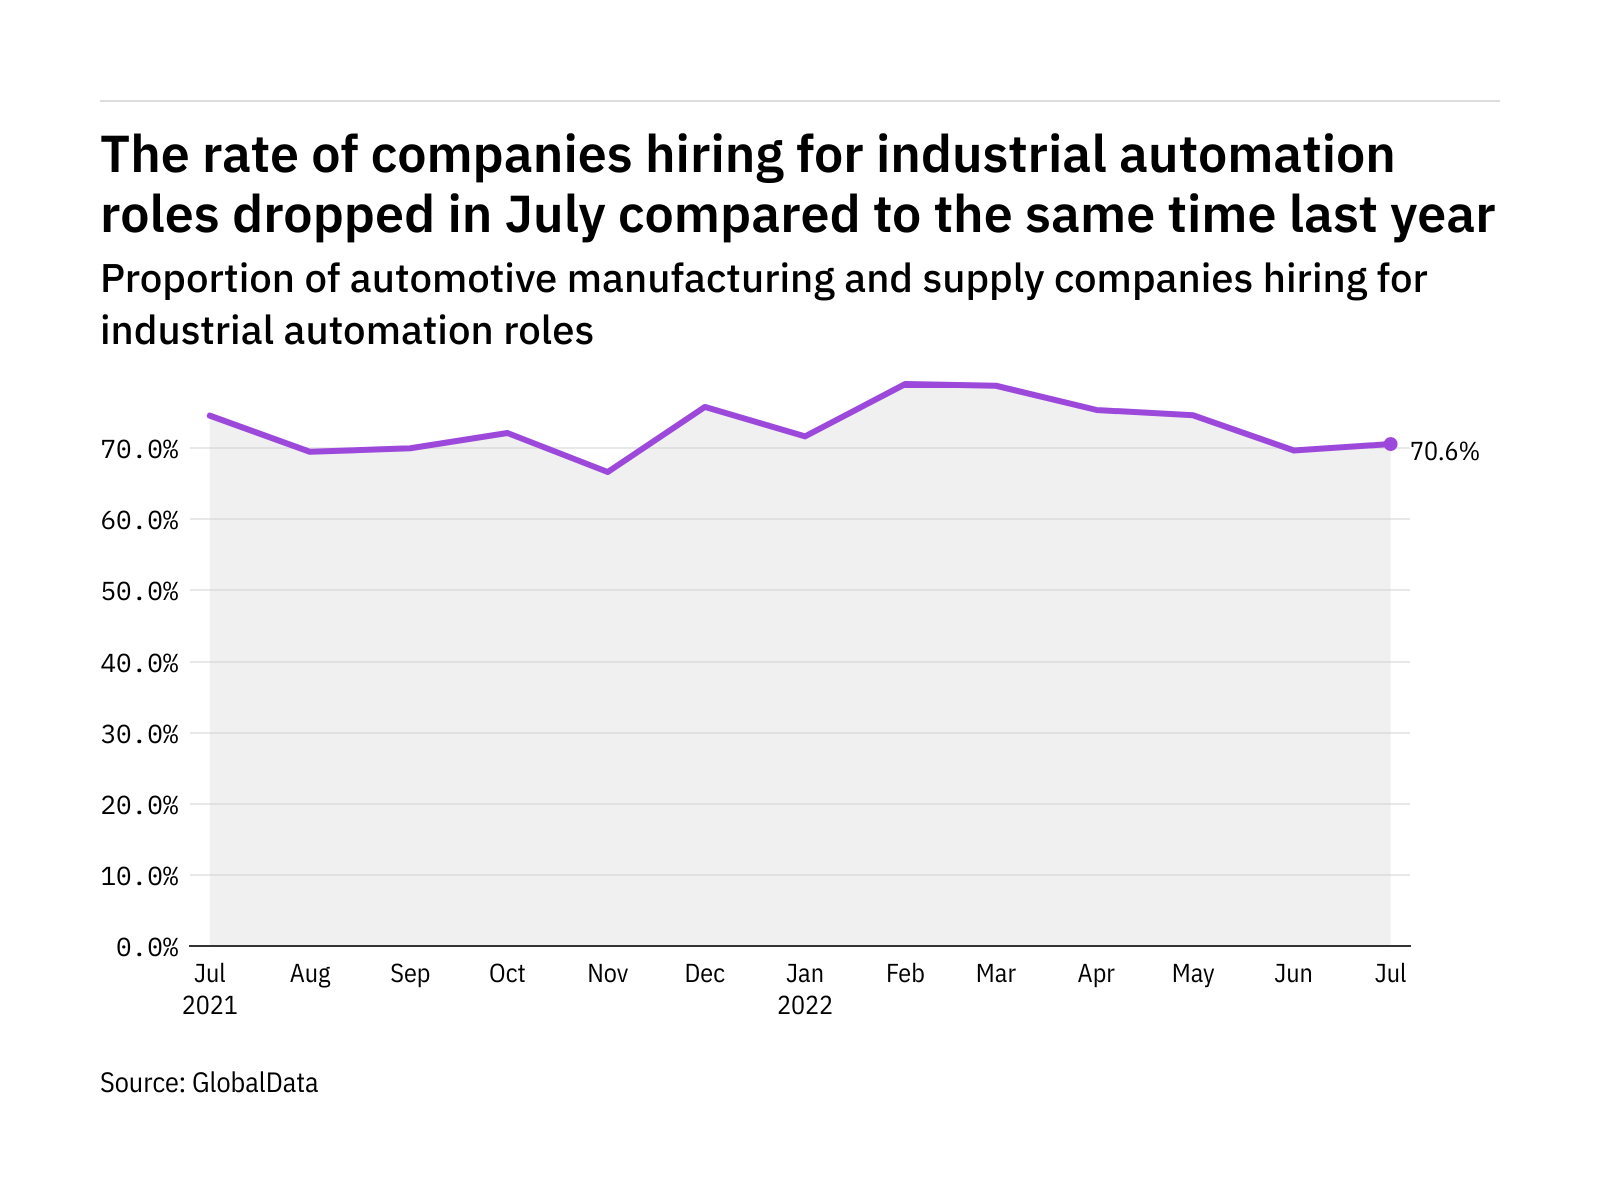 Industrial automation hiring levels in the automotive industry dropped in  July 2022 - Just Auto